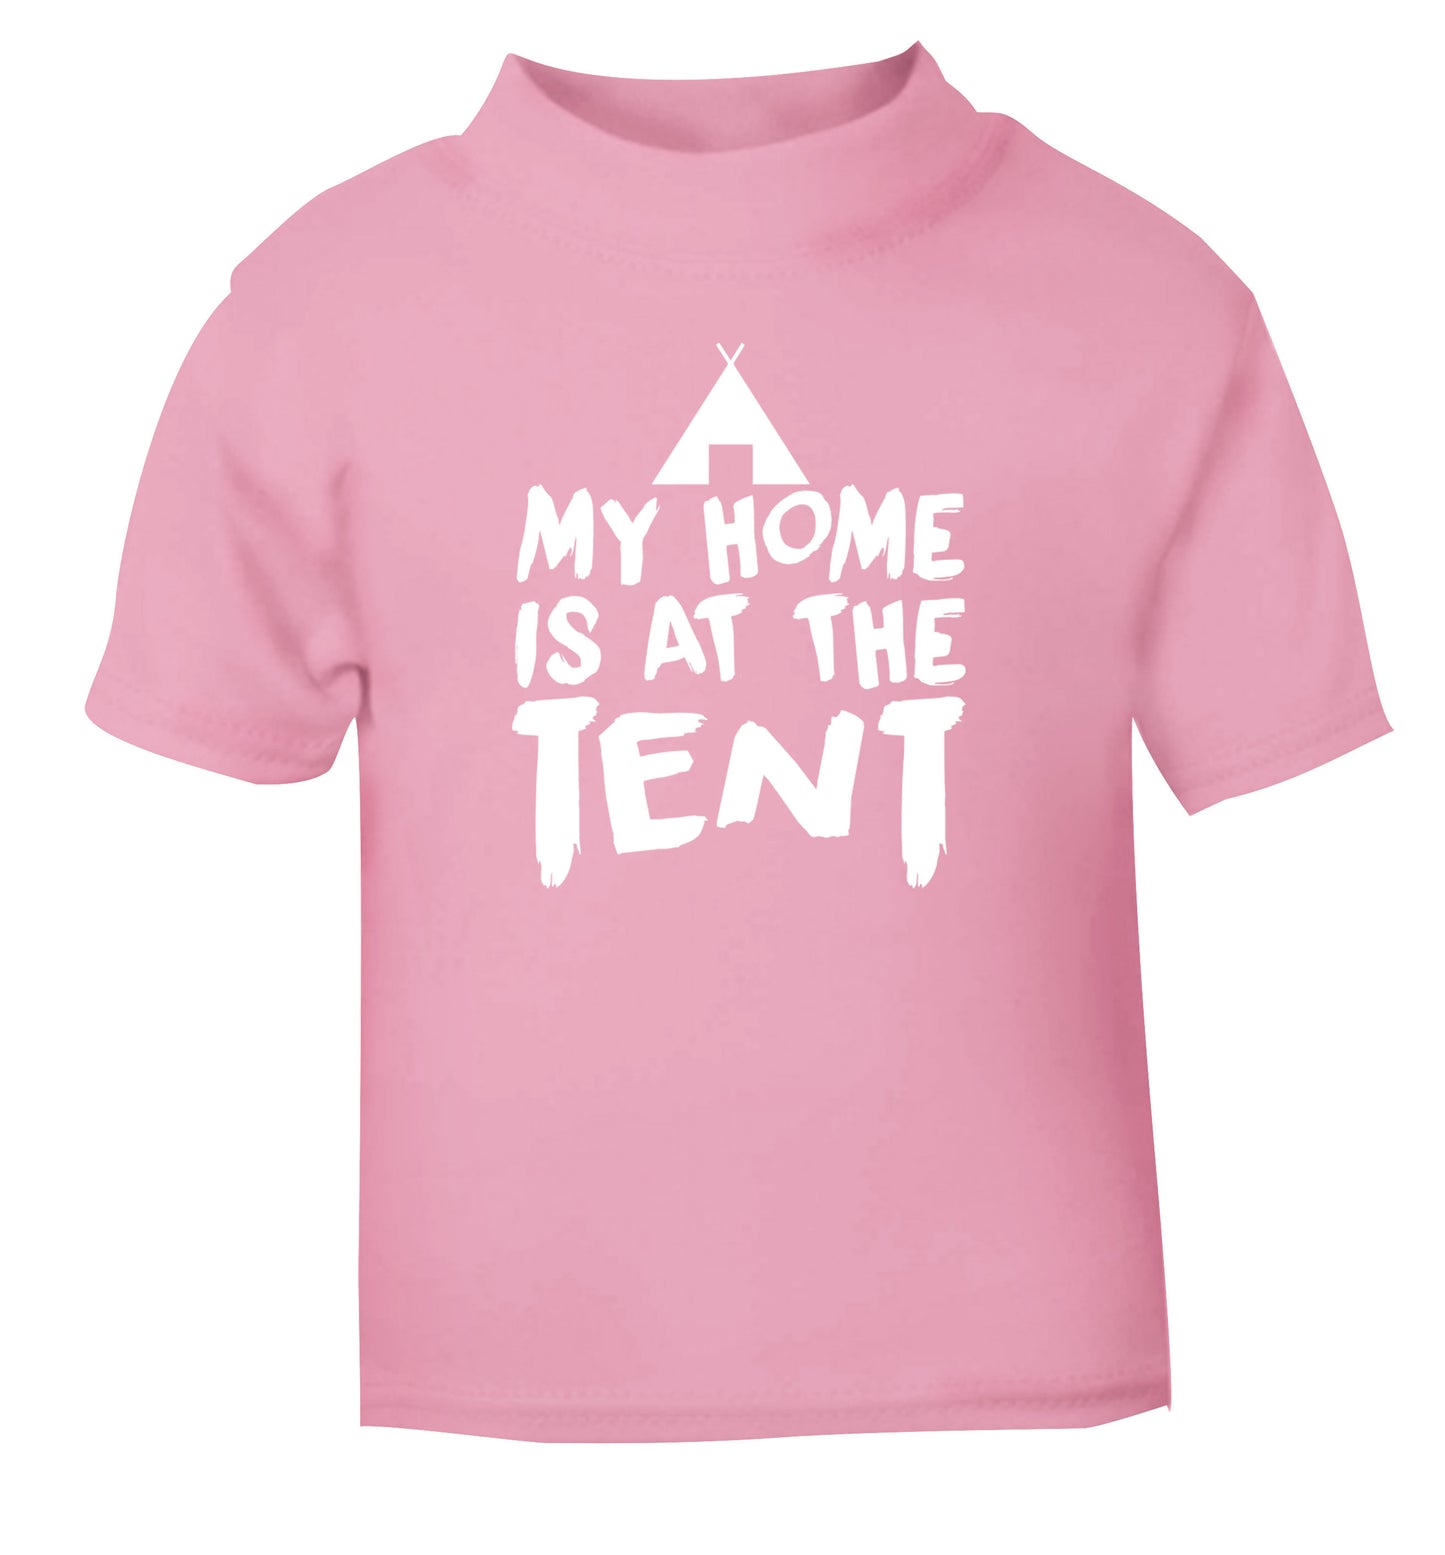 My home is at the tent light pink Baby Toddler Tshirt 2 Years